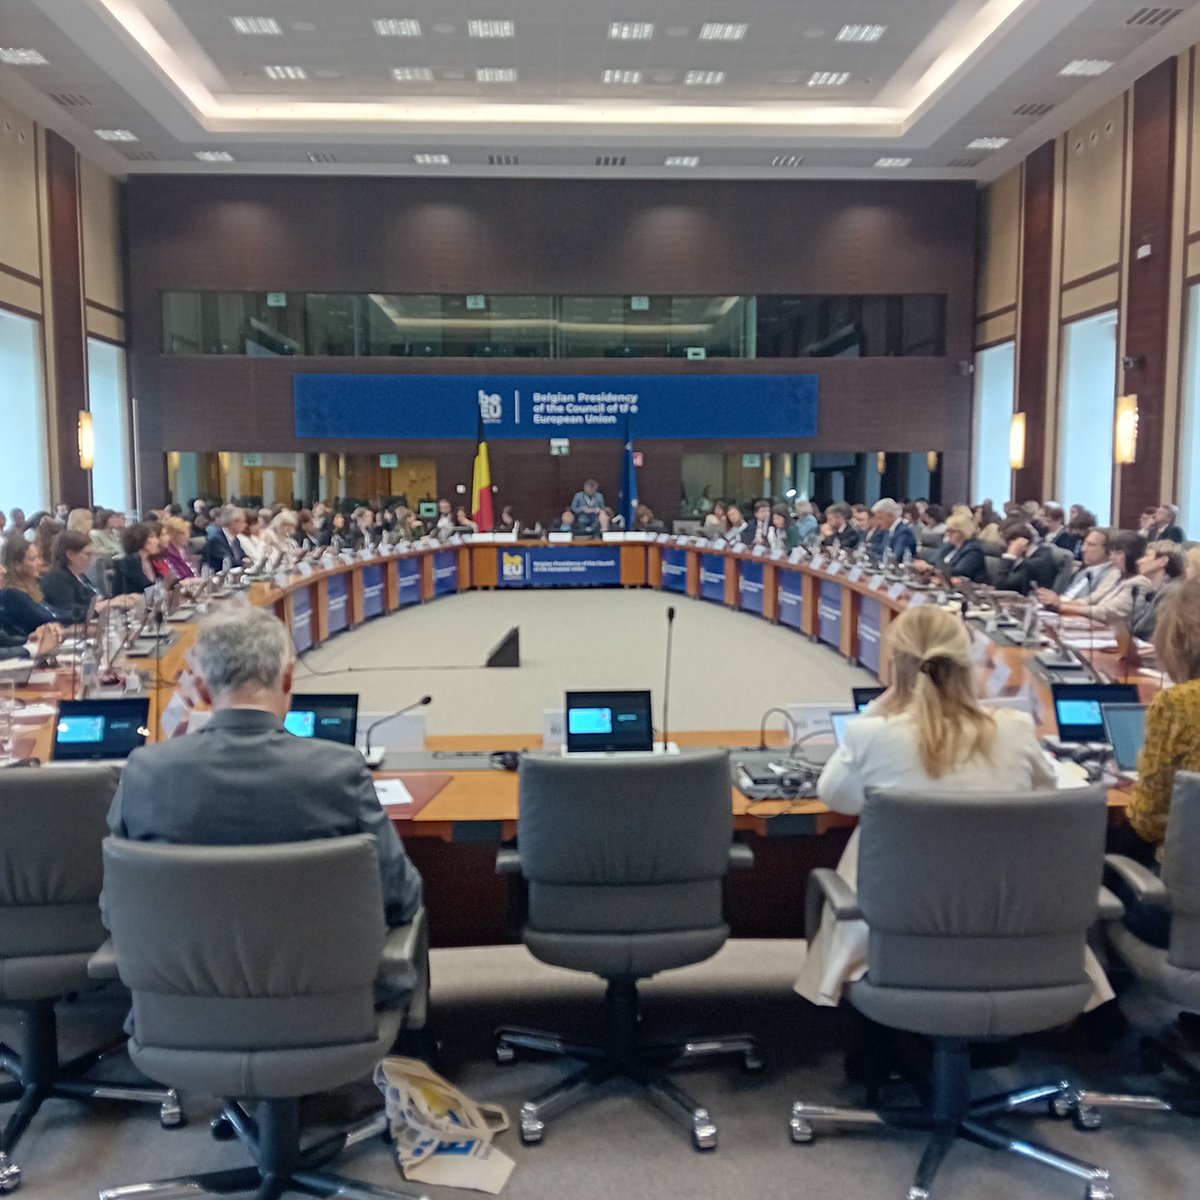 🌍 The future of Europe lies in the hands of its children. 
At the #EU2024BE #ChildGuarantee conference, the #EU Alliance for #InvestingInChildren urges to break the cycle of poverty and ensure every child's potential! 

alliance4investinginchildren.eu/belgian-presid…

@EU2024BE 
@EPSocialAffairs